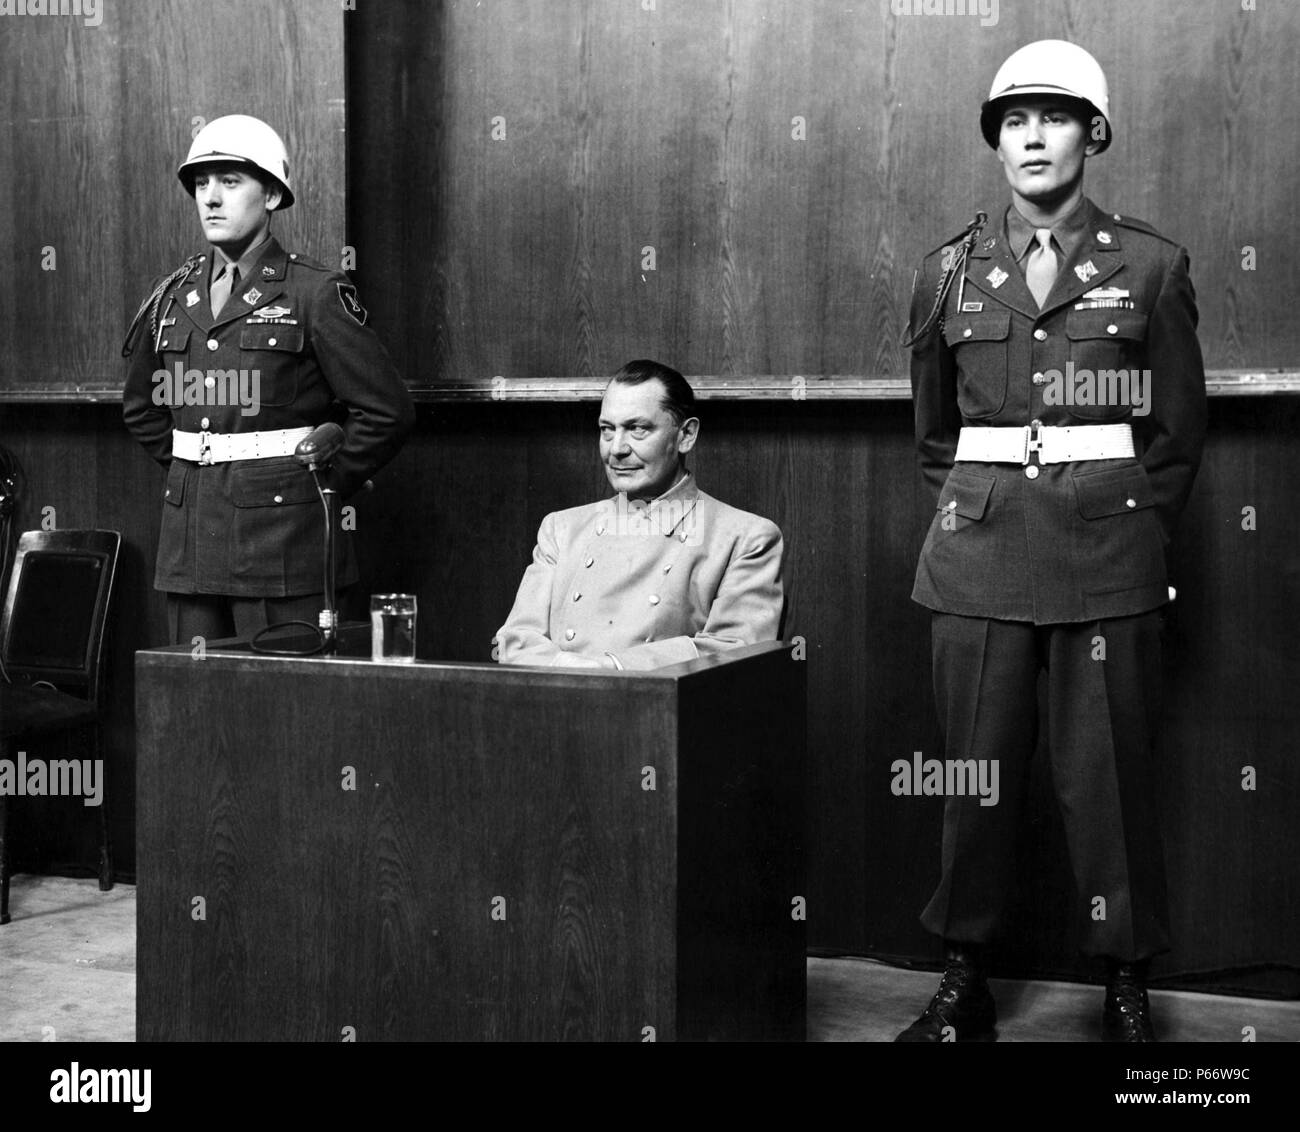 Hermann Wilhelm Göring January 1893 – October 1946, German politician, military leader at his trial for war Crimes 1946 Stock Photo